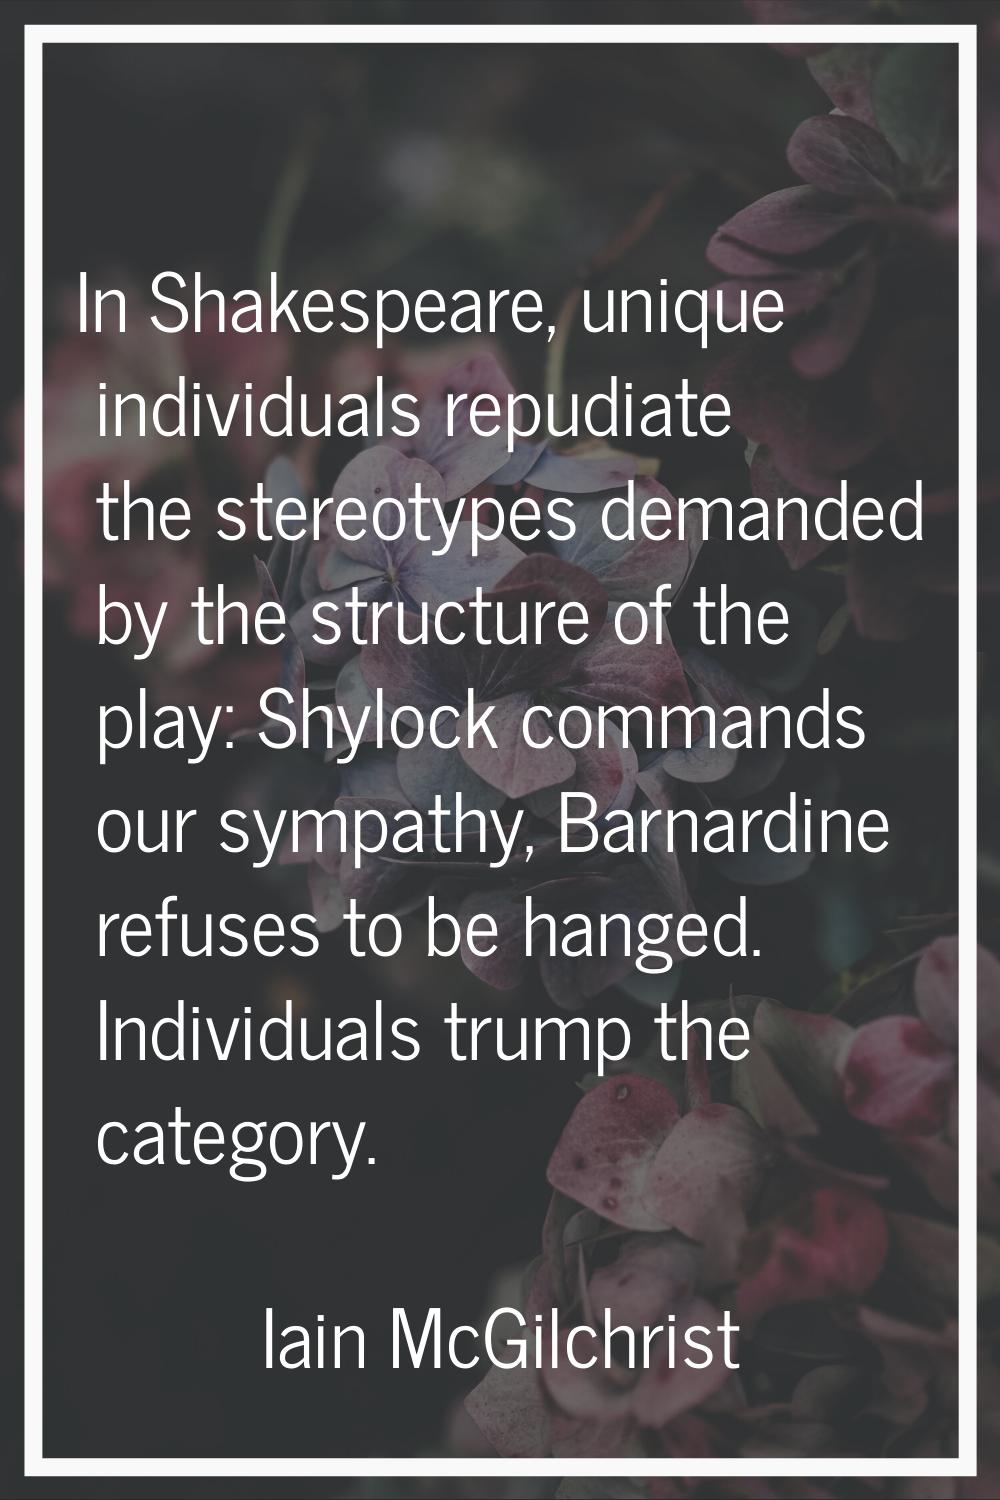 In Shakespeare, unique individuals repudiate the stereotypes demanded by the structure of the play: